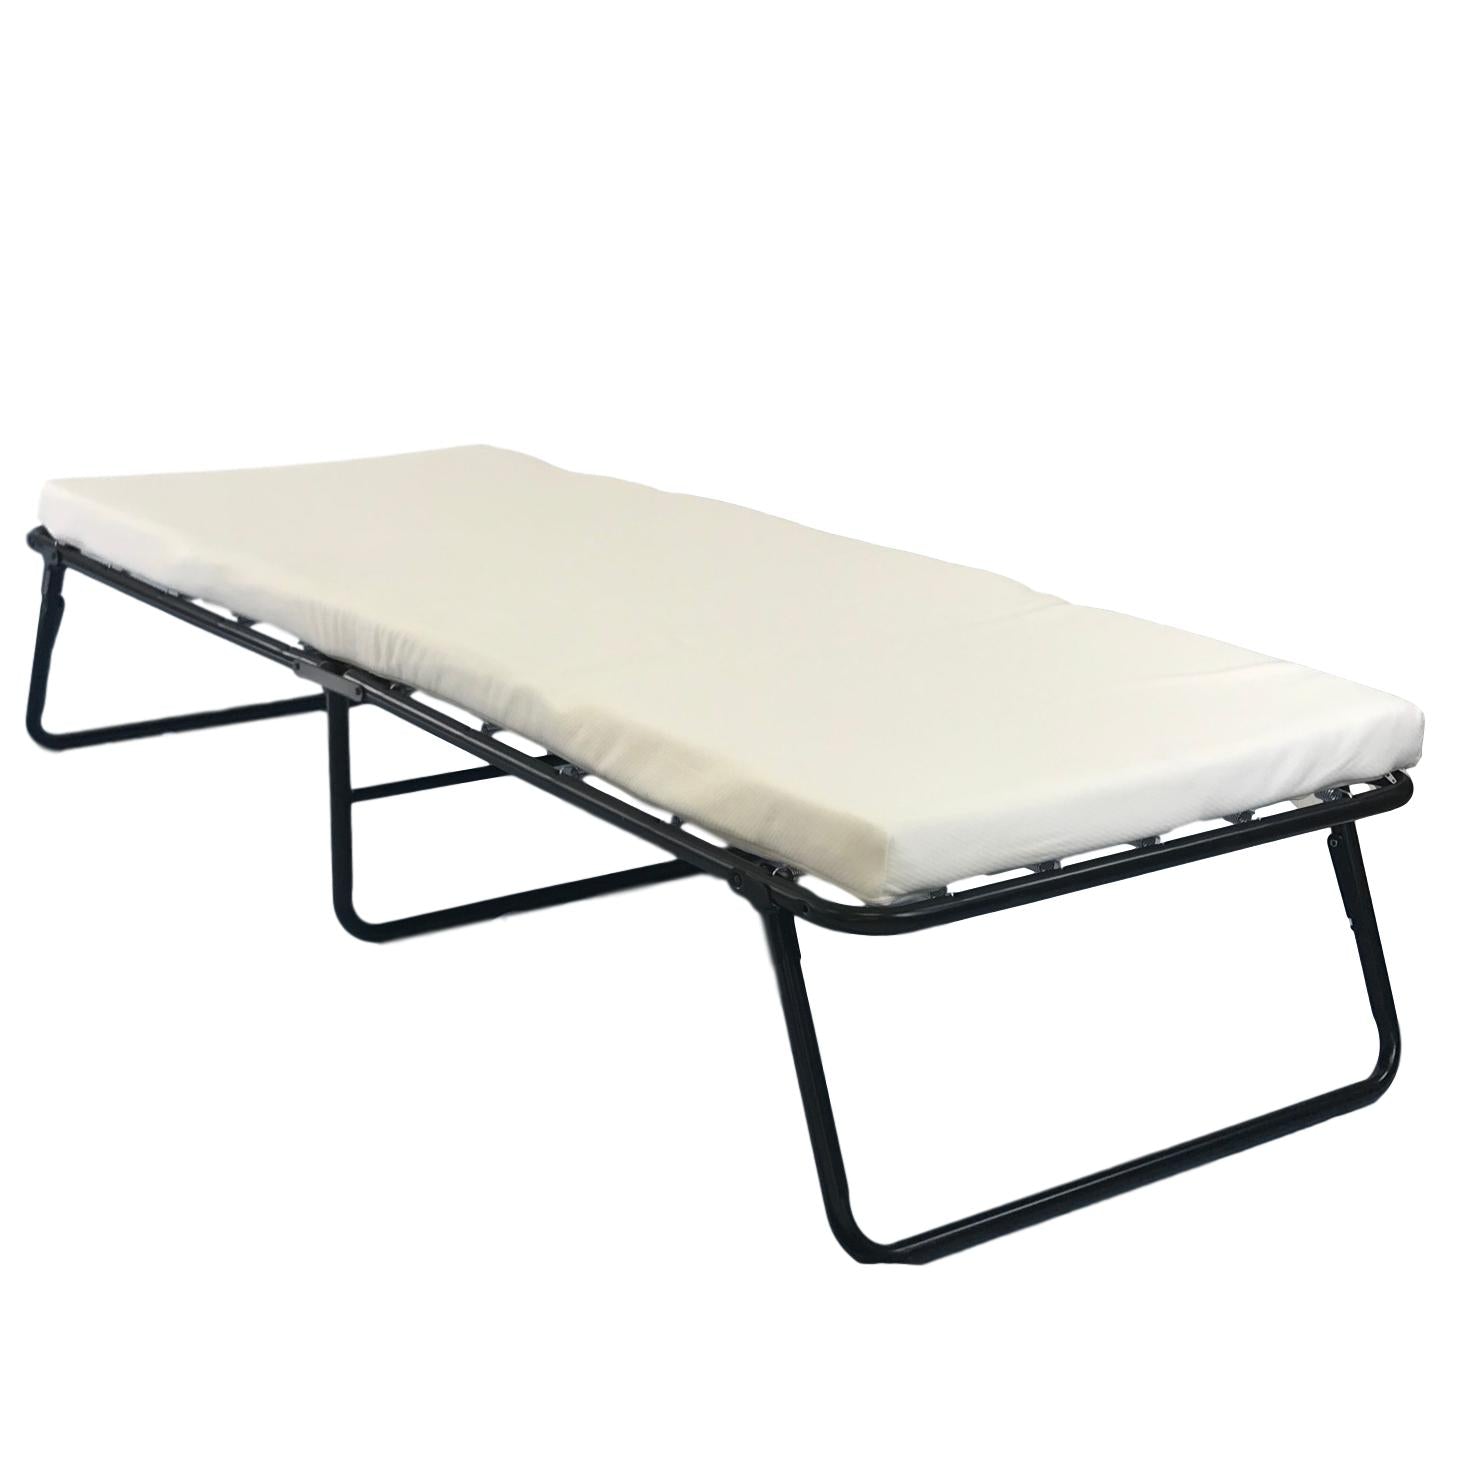 ViscoLogic Diamond Rollaway Folding Bed with Luxurious Memory Foam Mattress - Super Strong Sturdy Frame Cots and Wheels for Easy Movement